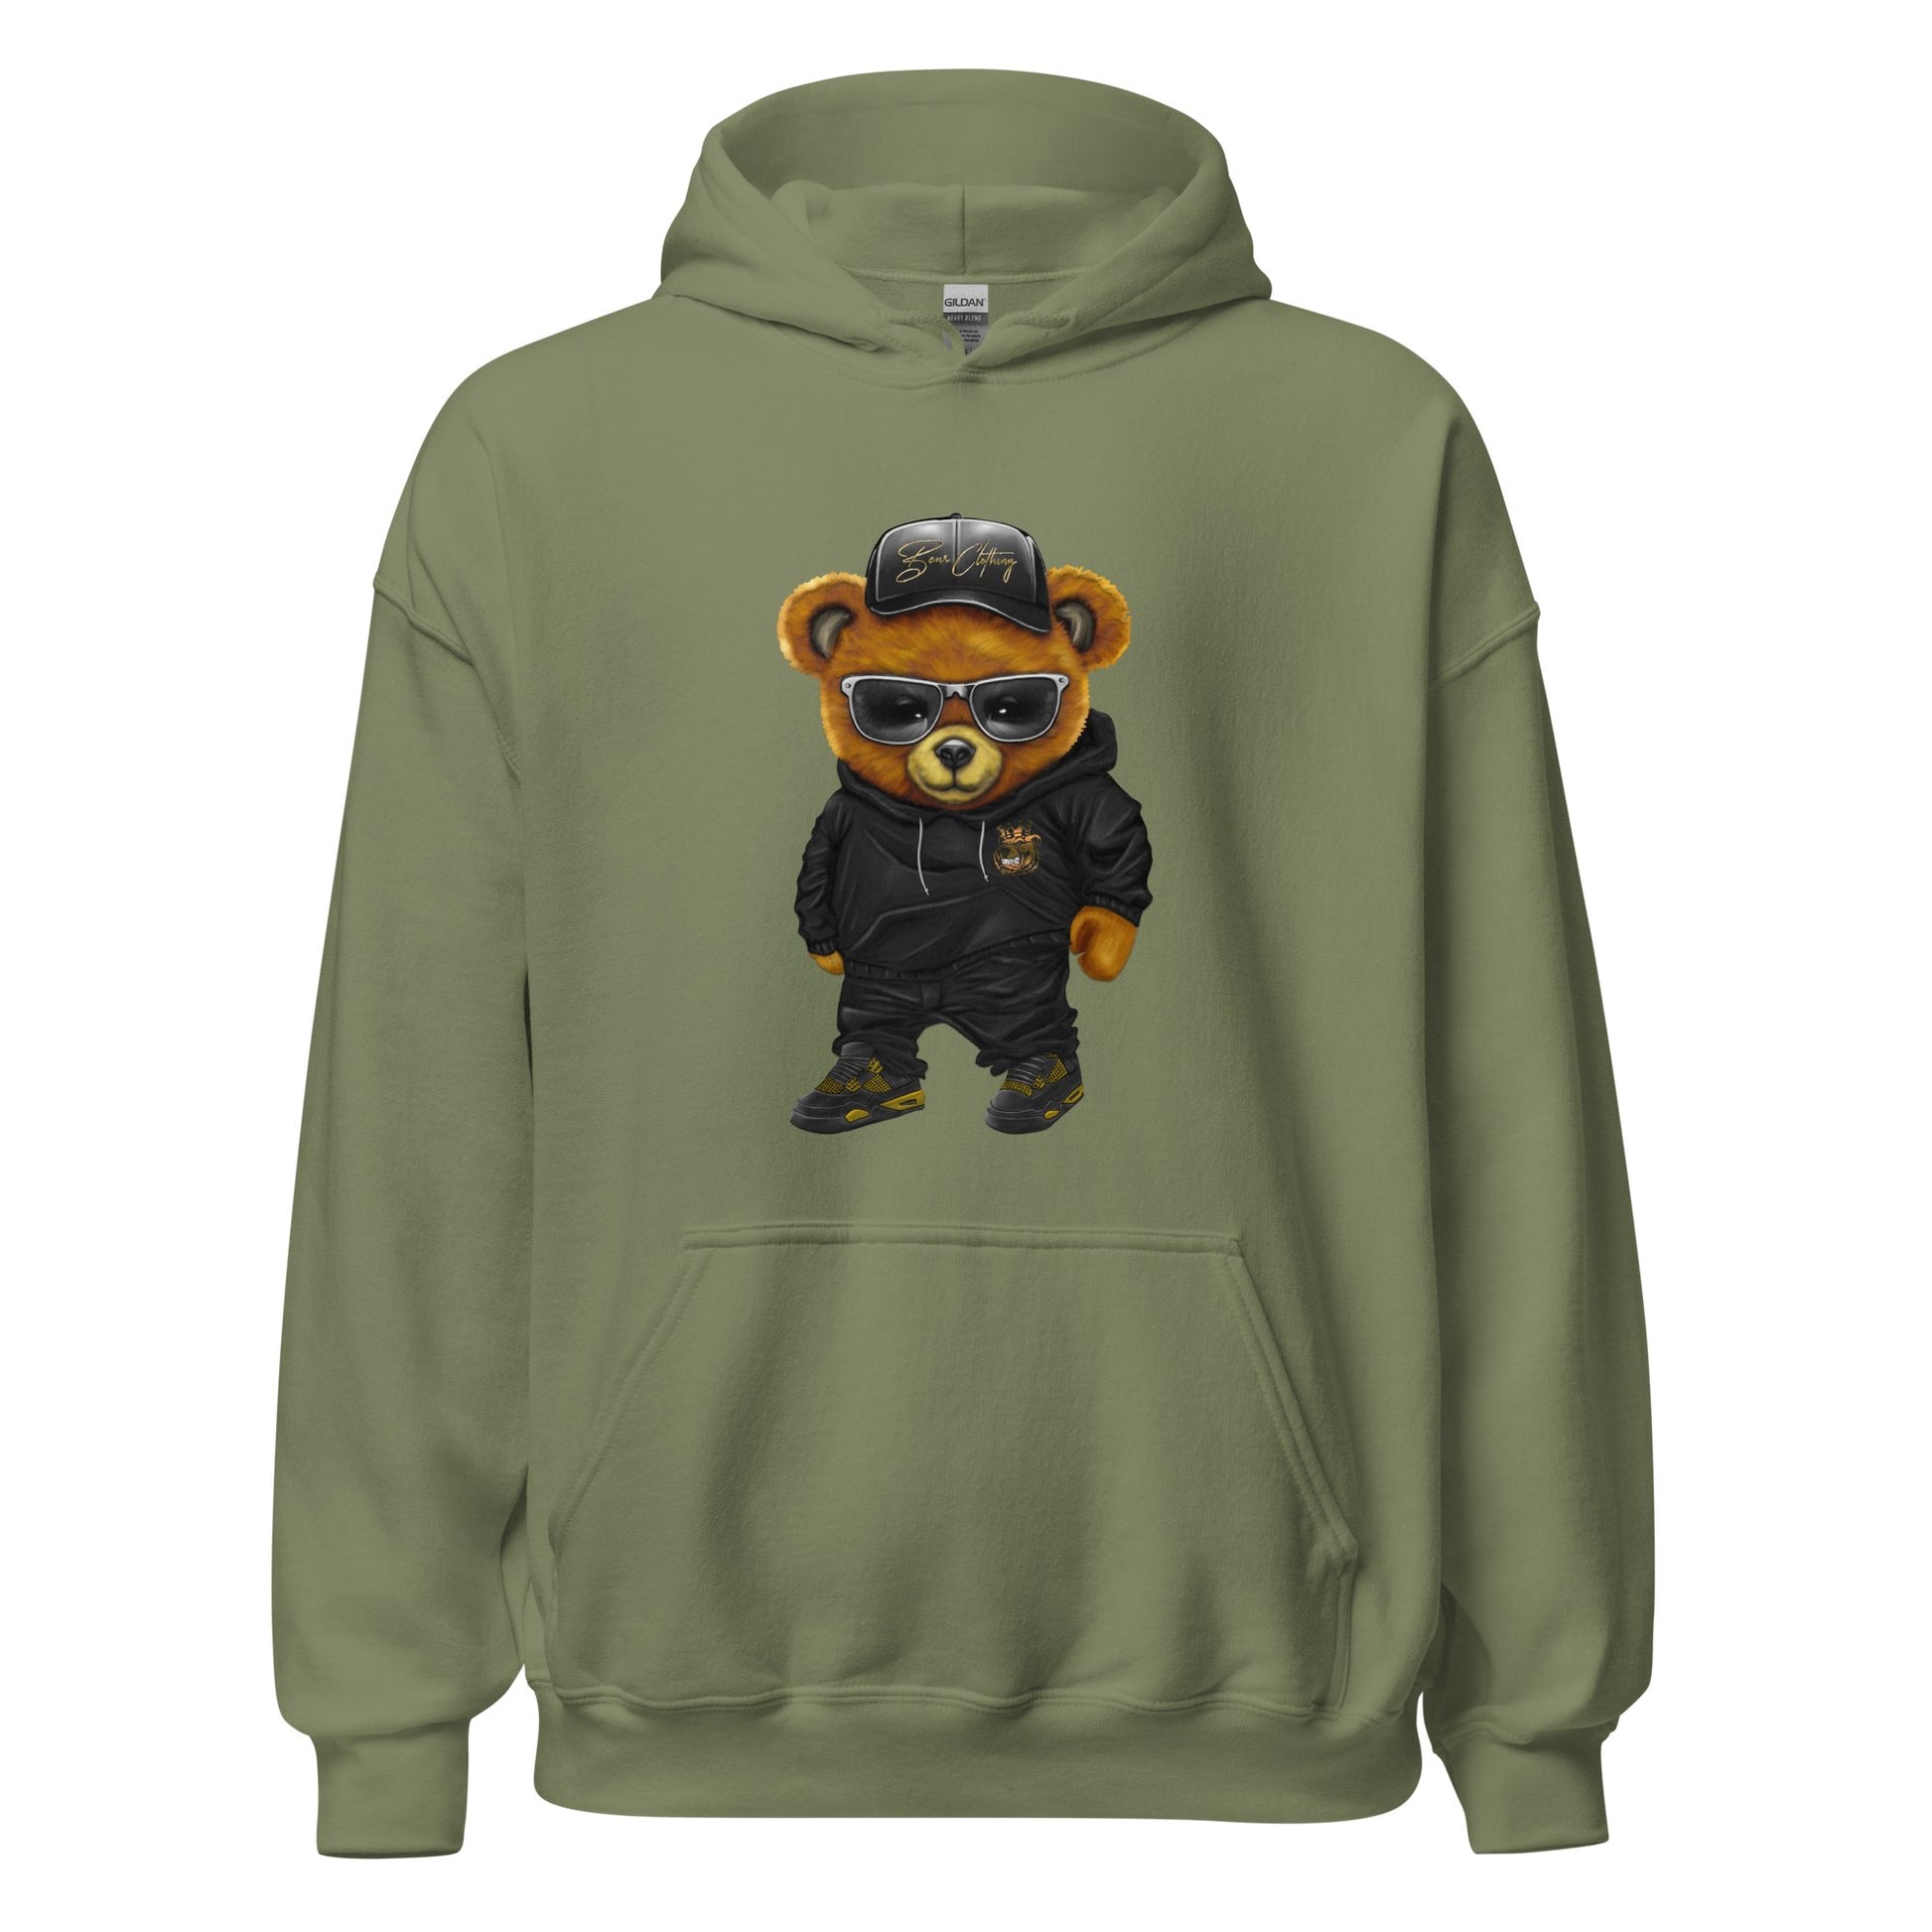 Wrapped In His Worth Honey Bear Unisex Hoodie - Bearclothing